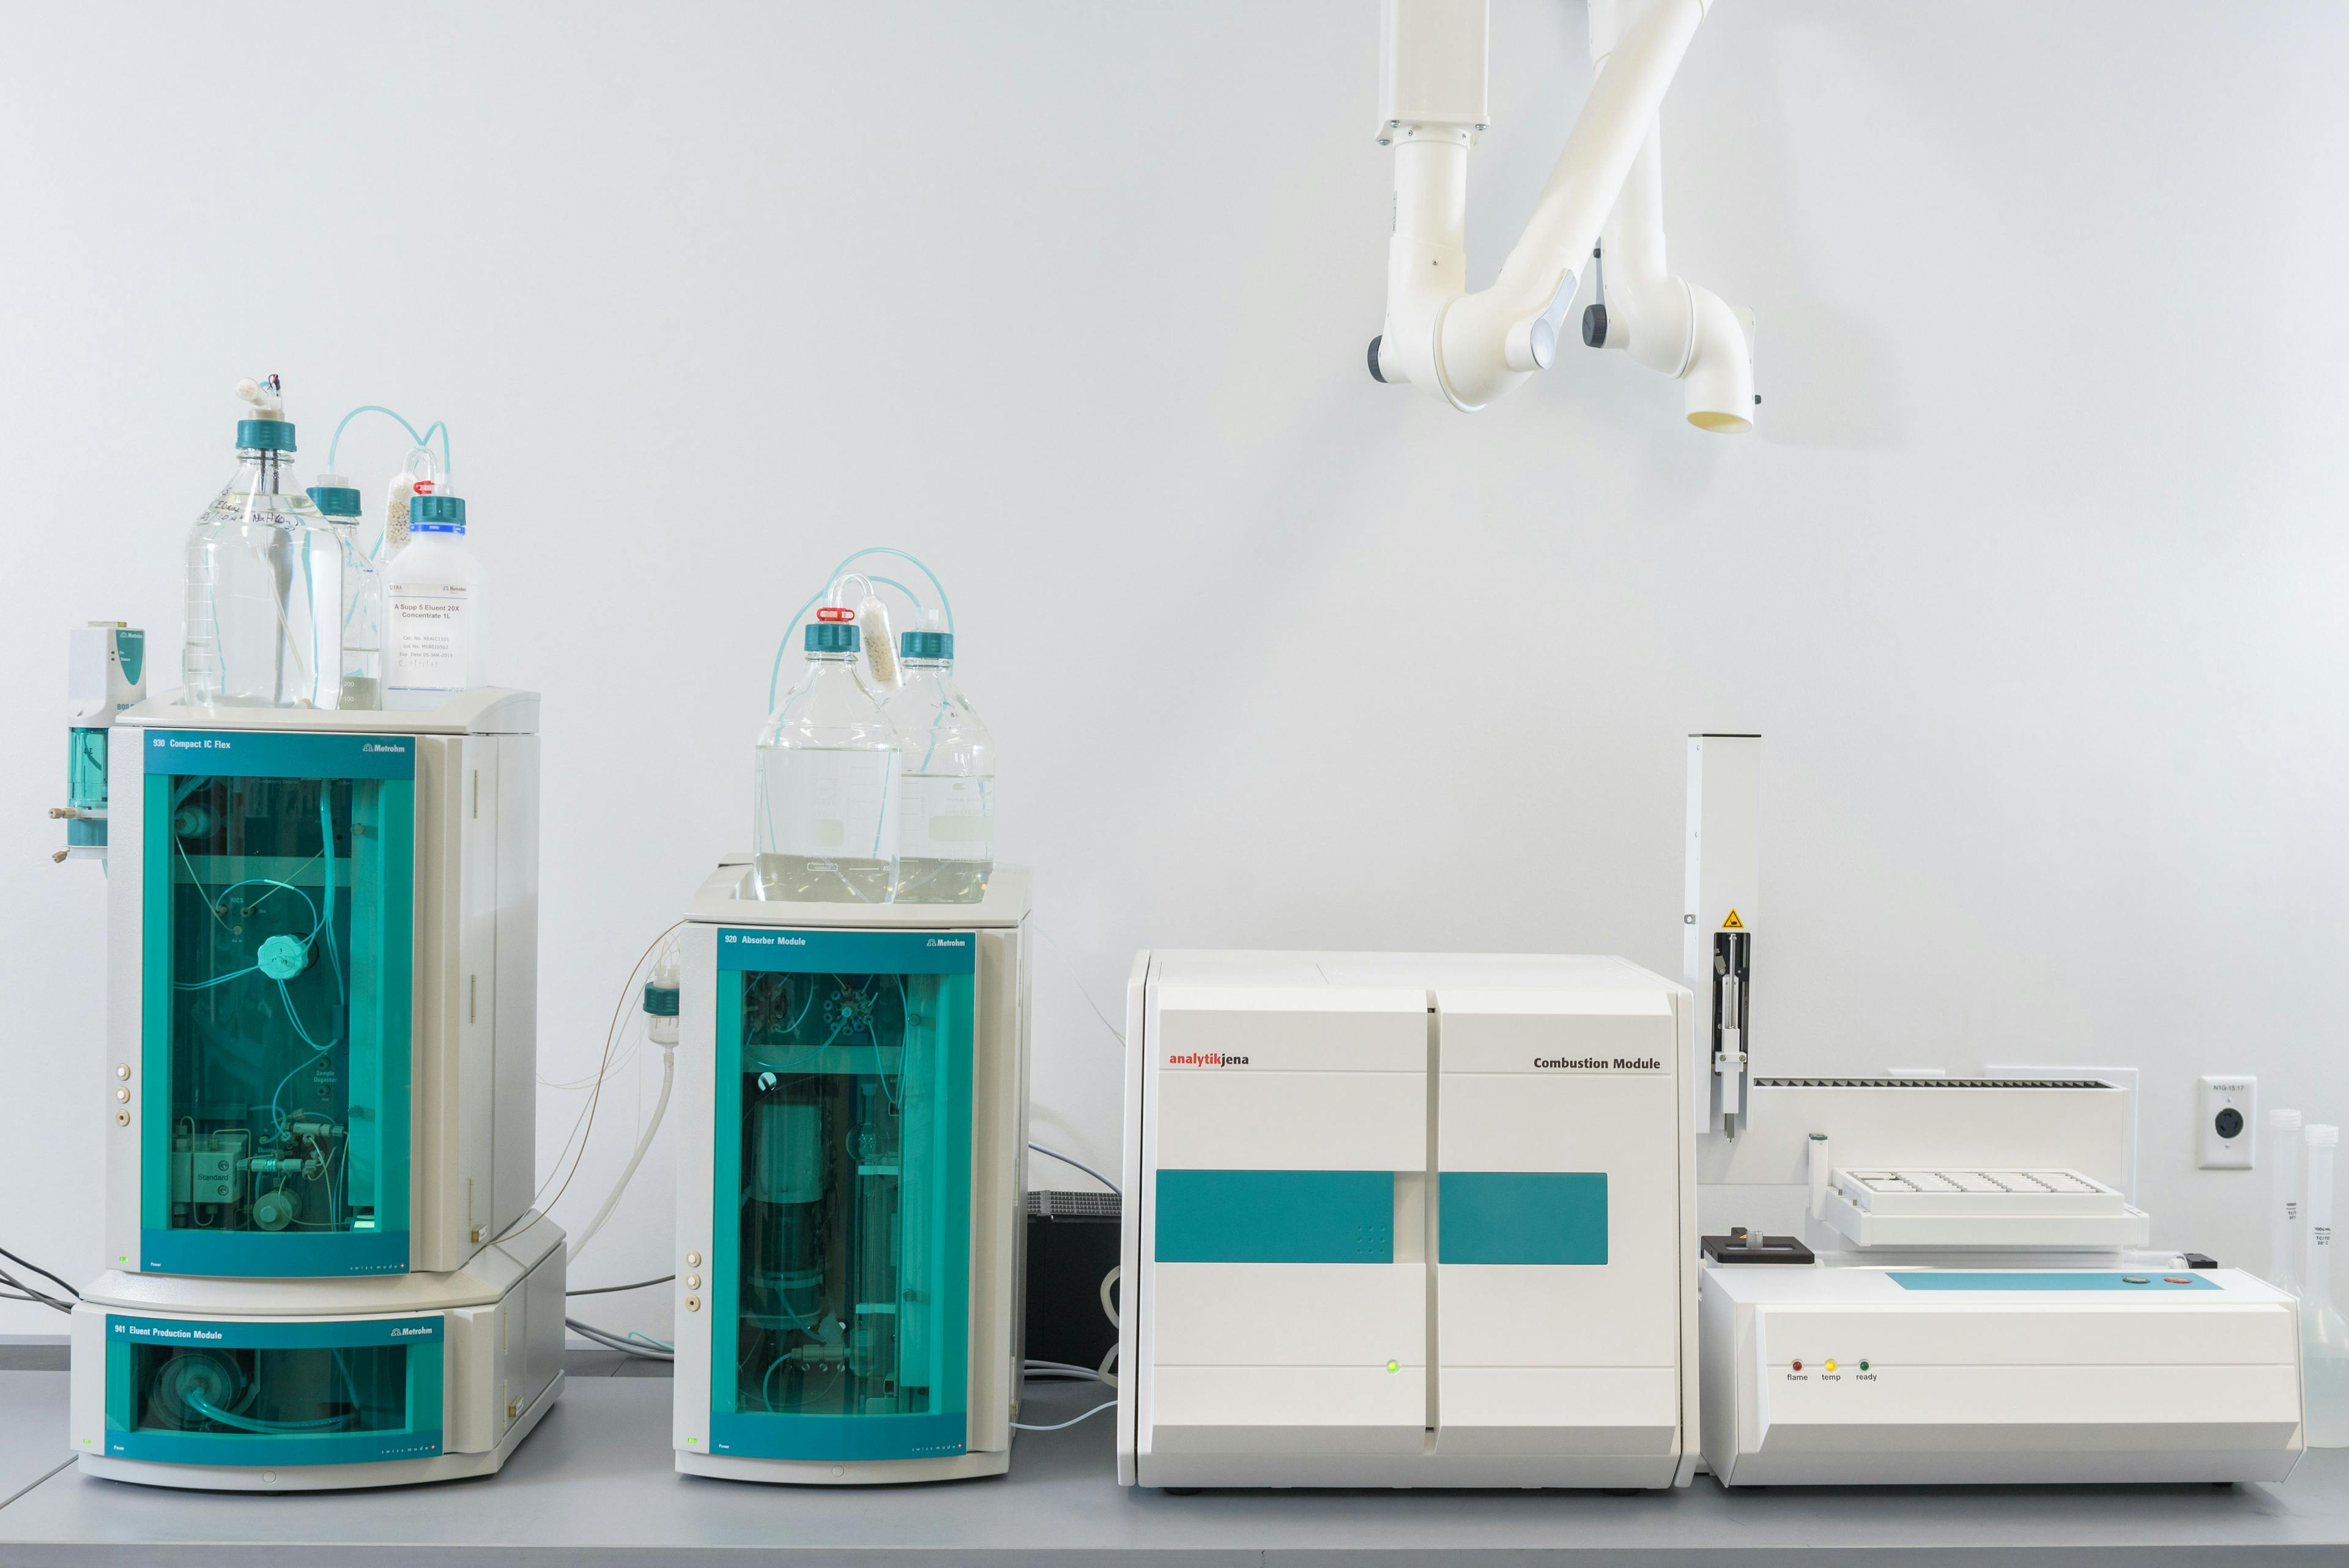 Metrohm’s ProfilerF Wasterwater and ProfilerF Solids analyzers are designed for environmental analyses and compliance.